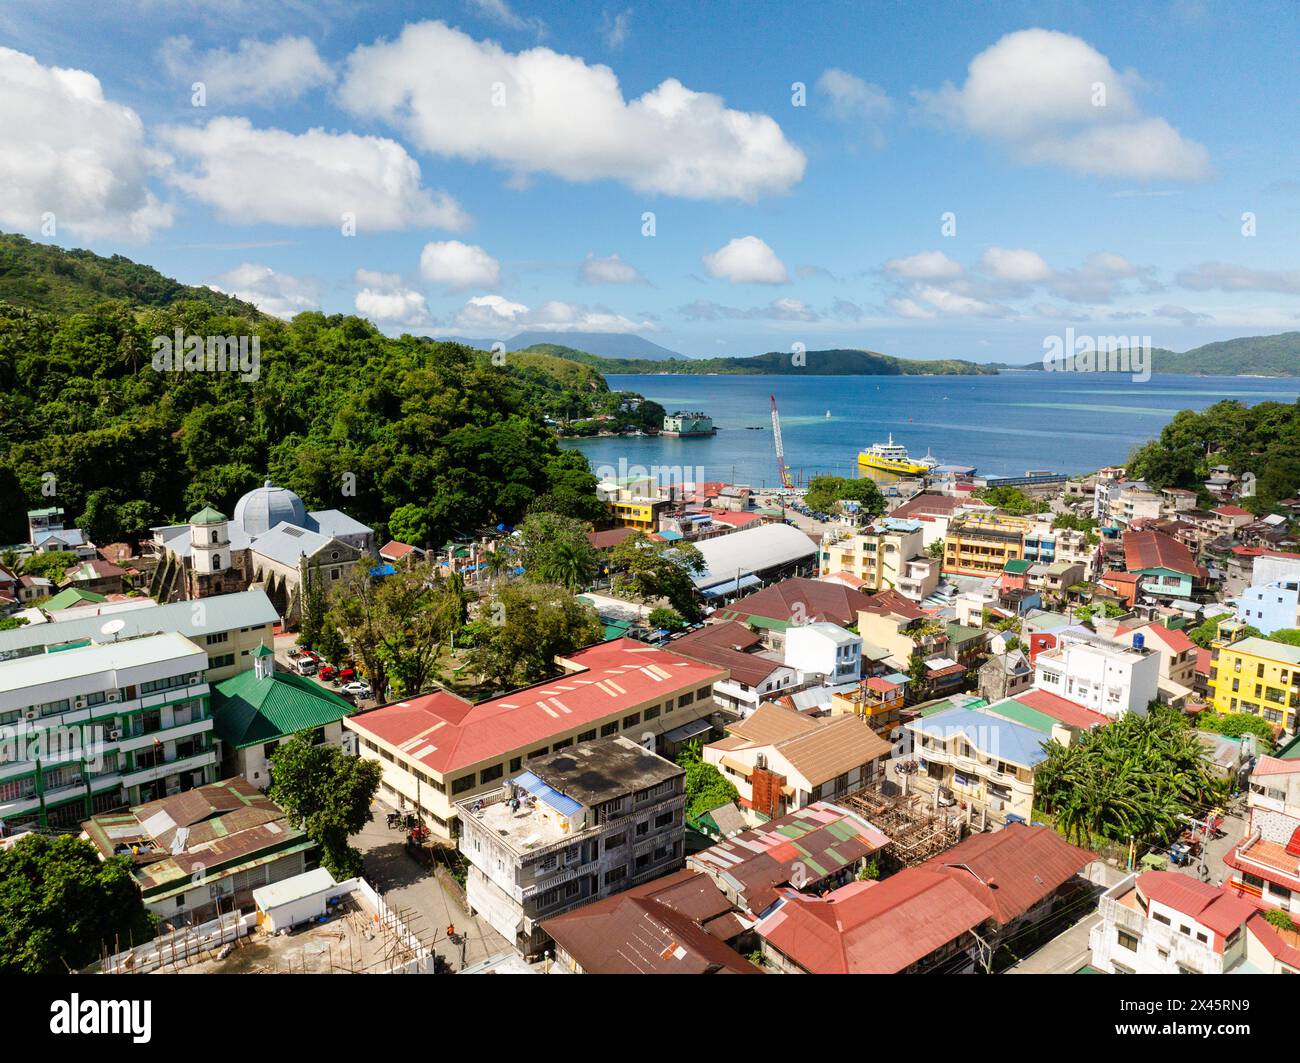 Island with small town with residential area and buildings. Romblon Island, Romblon, Philippines. Stock Photo